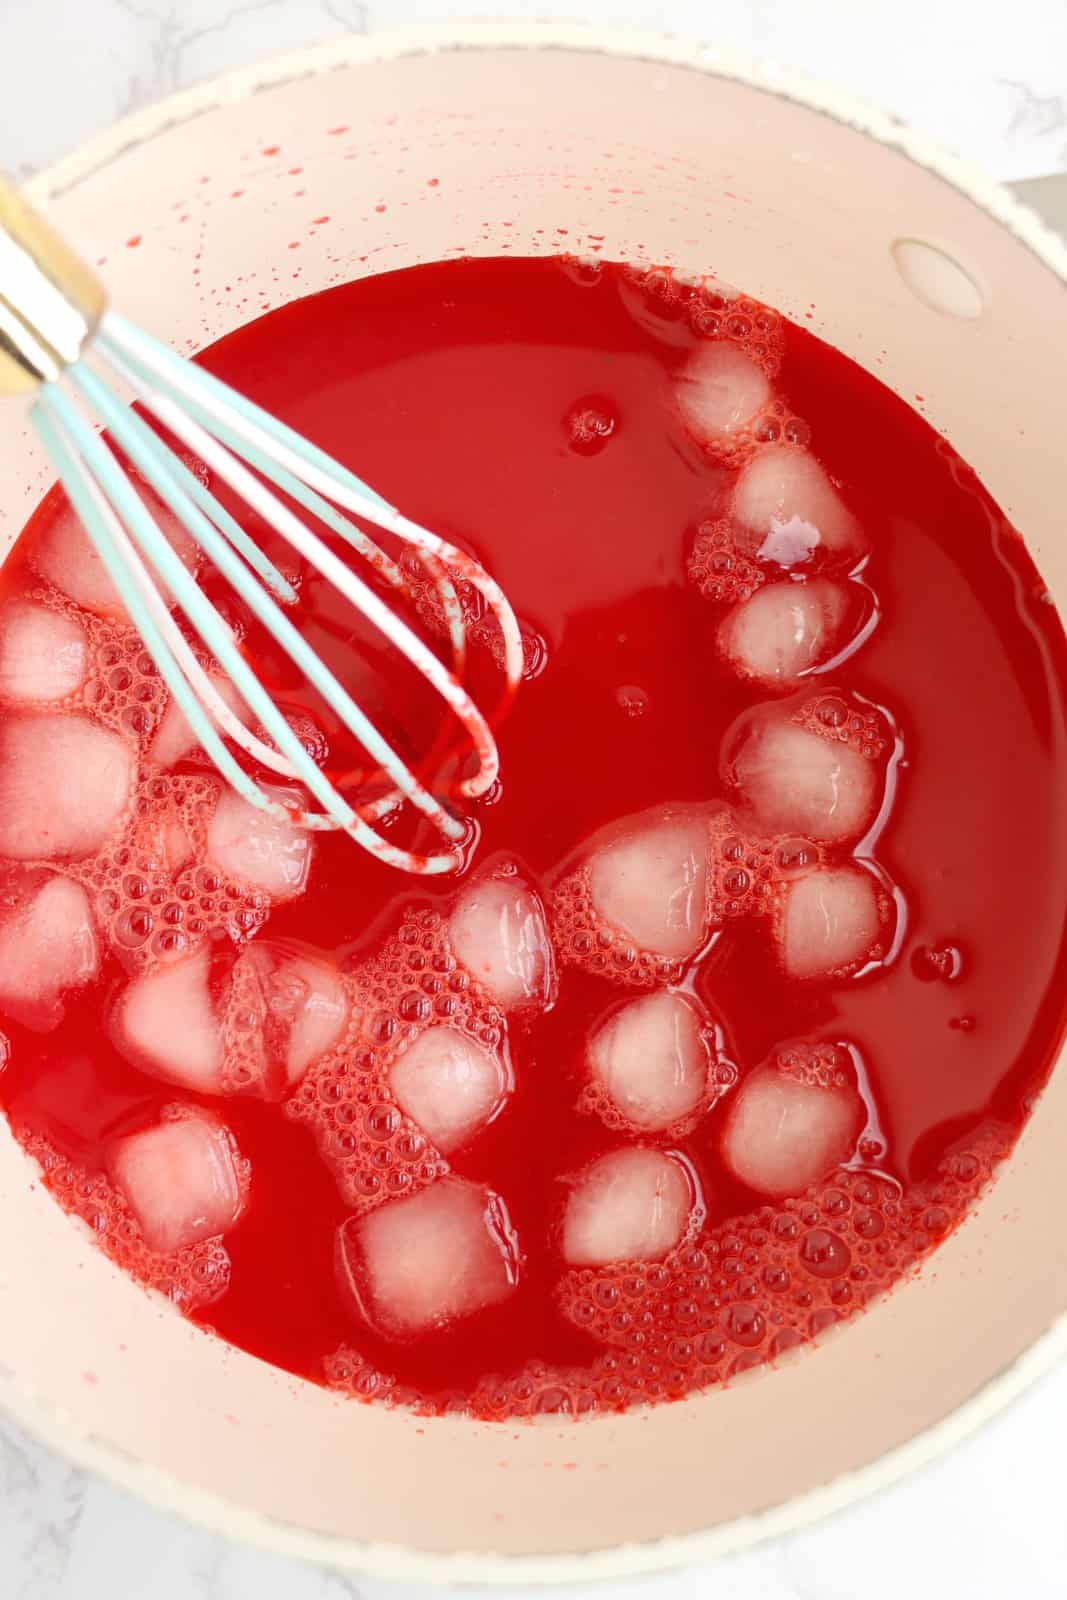 Ice cubes in a cherry jello mixture. 